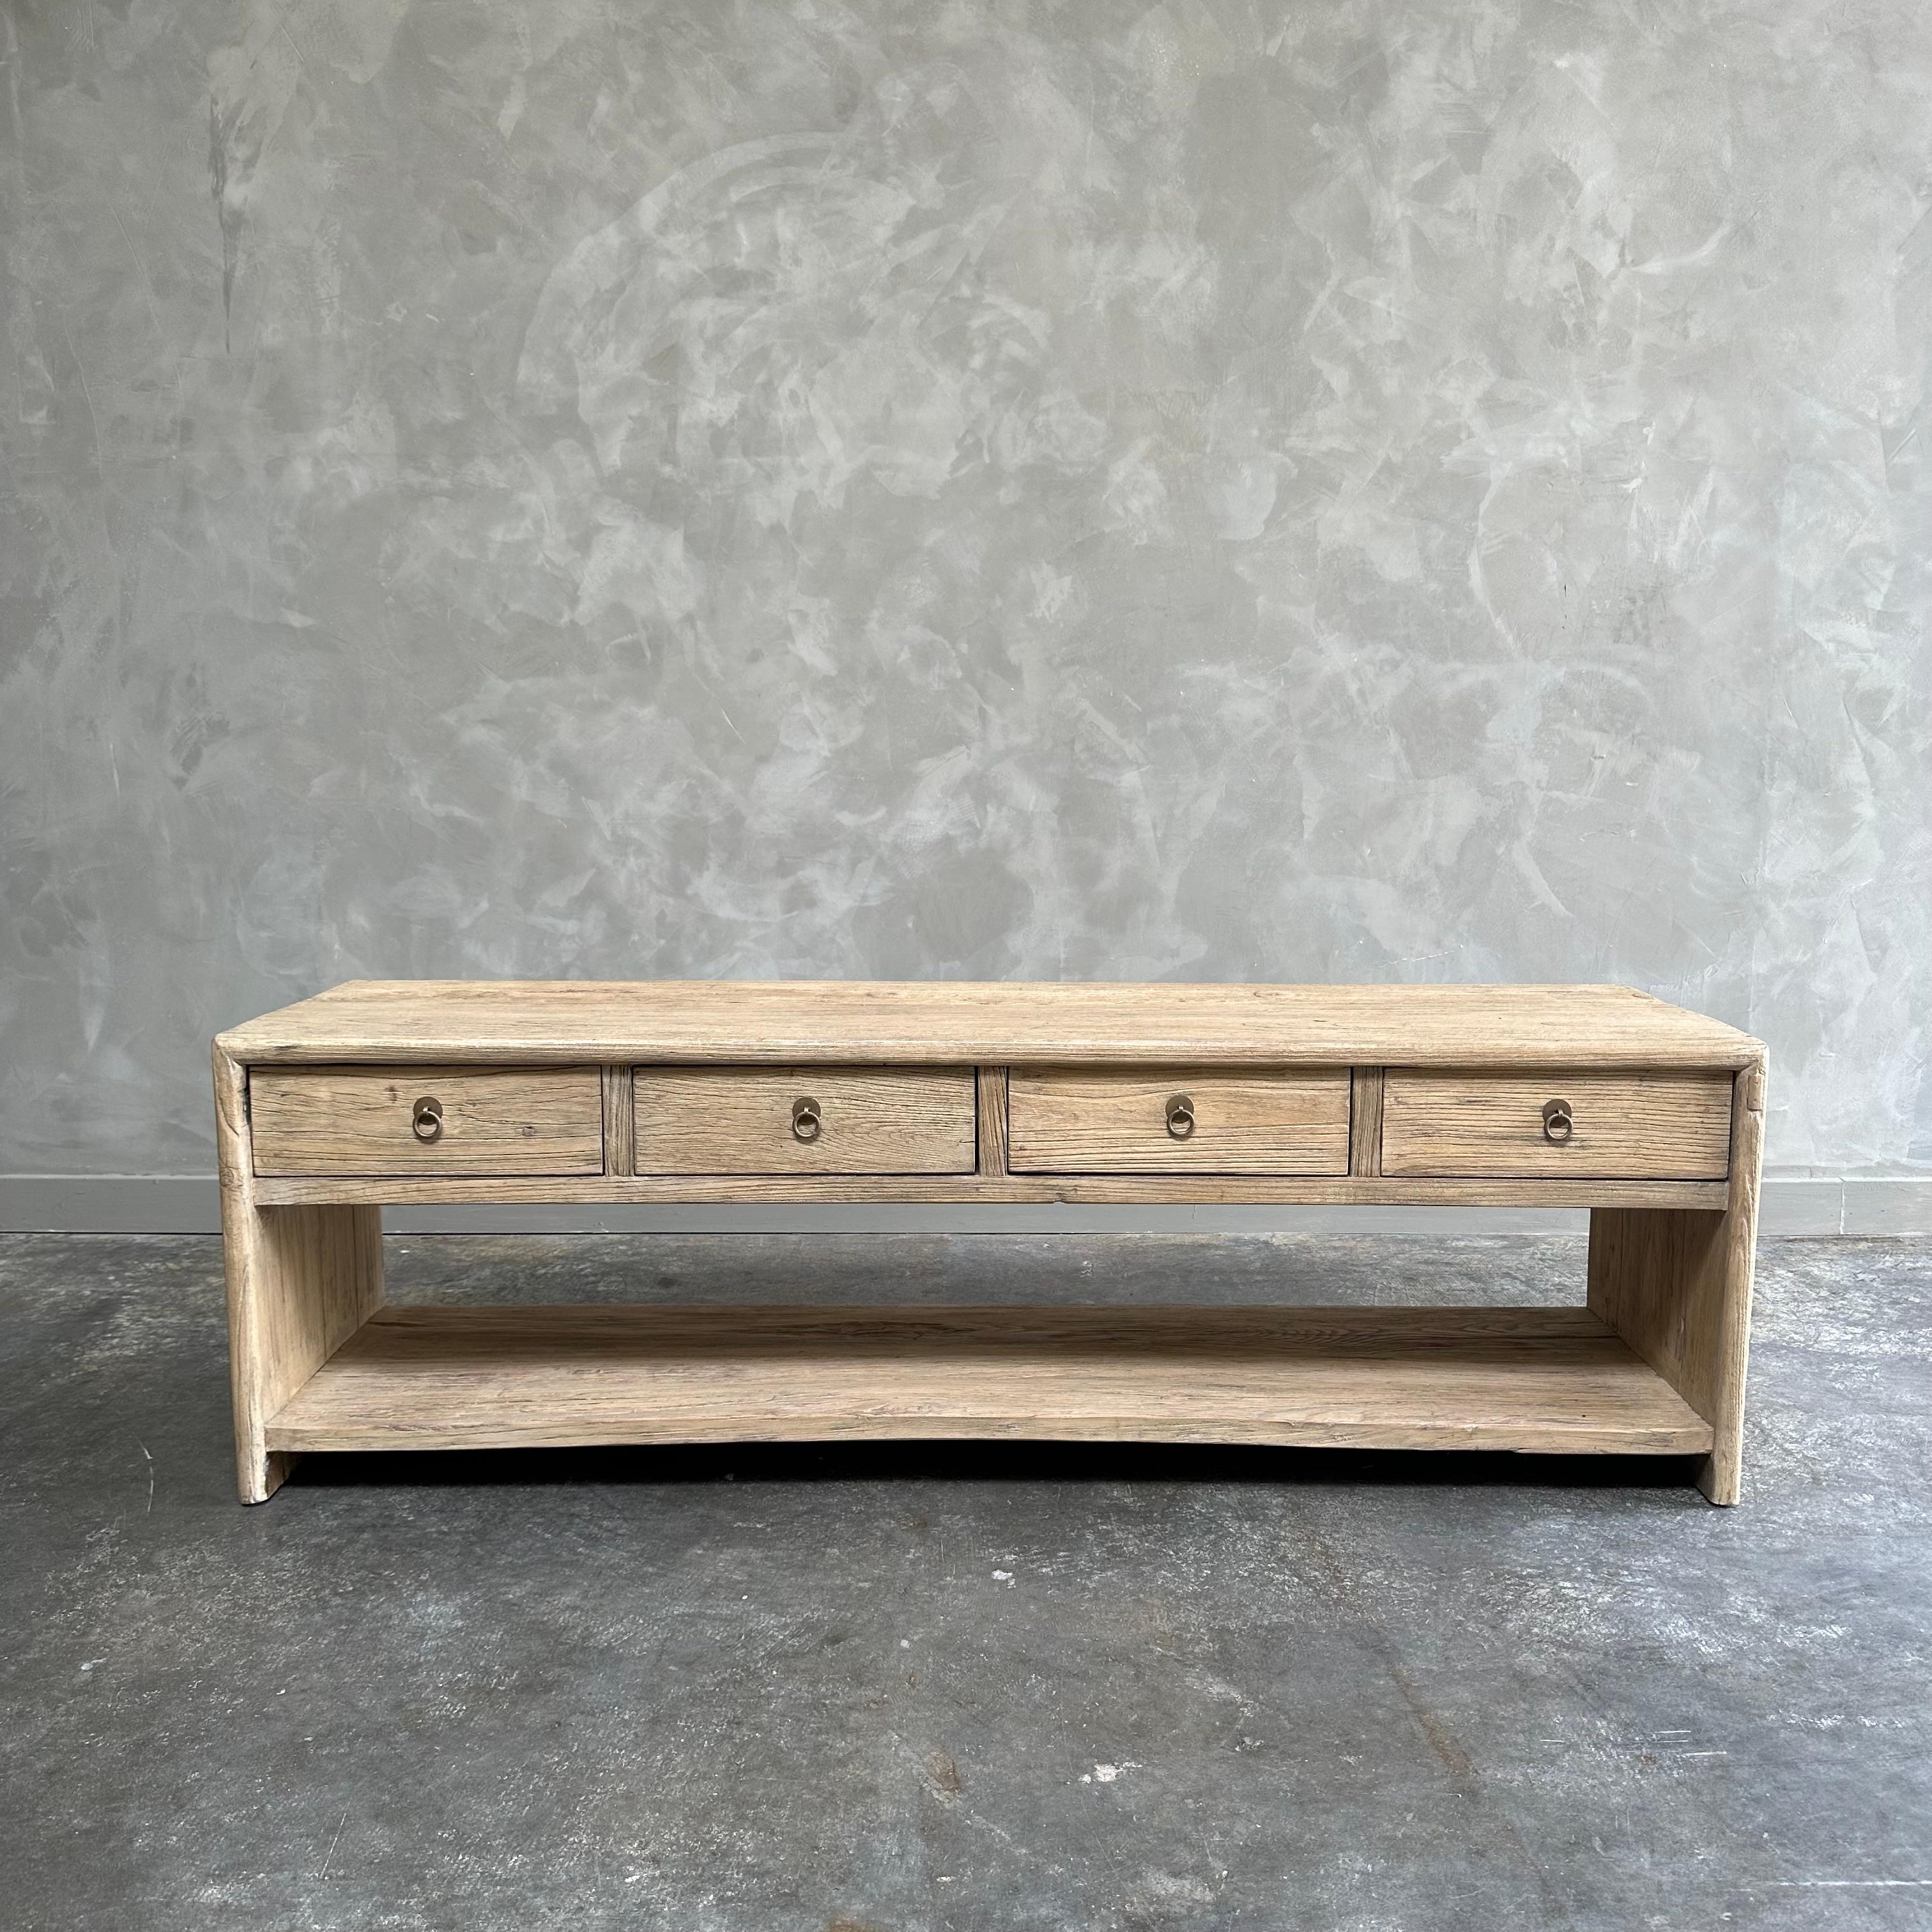 Custom made low console by bloom home inc. 
These old elm timbers show in its most primal, natural form. The artisanal construction methods highlight the elm woods beautiful grain pattern & knots and fissures from its past life. The most authentic